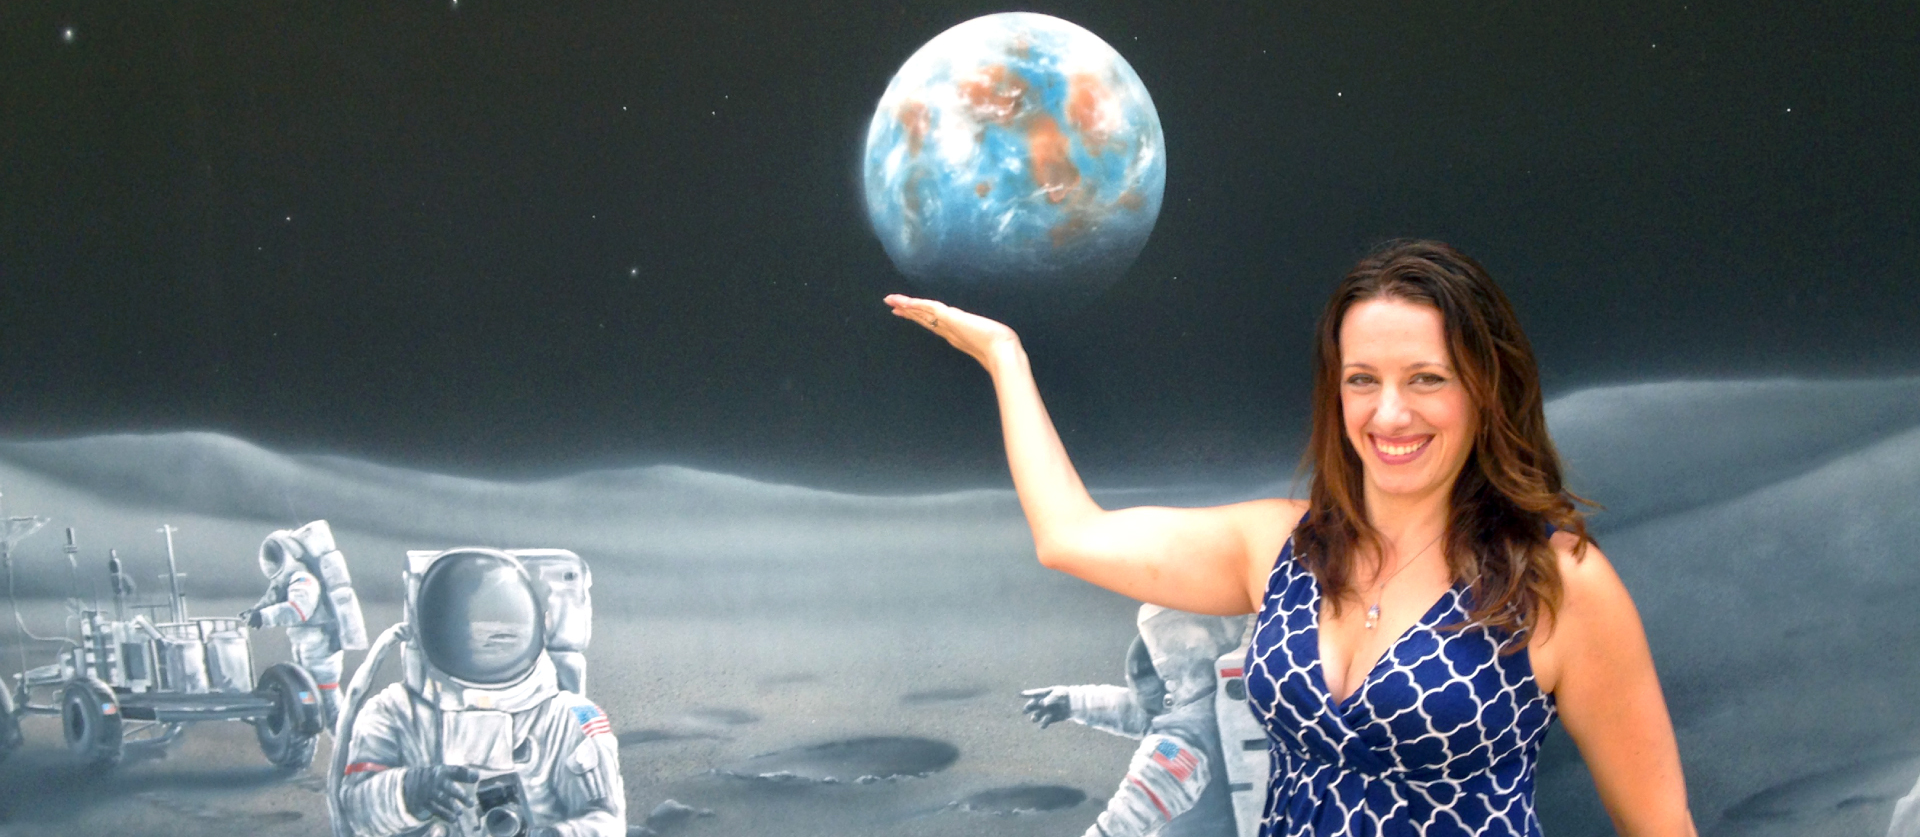 Laura Forczyk poses in front of a space mural.